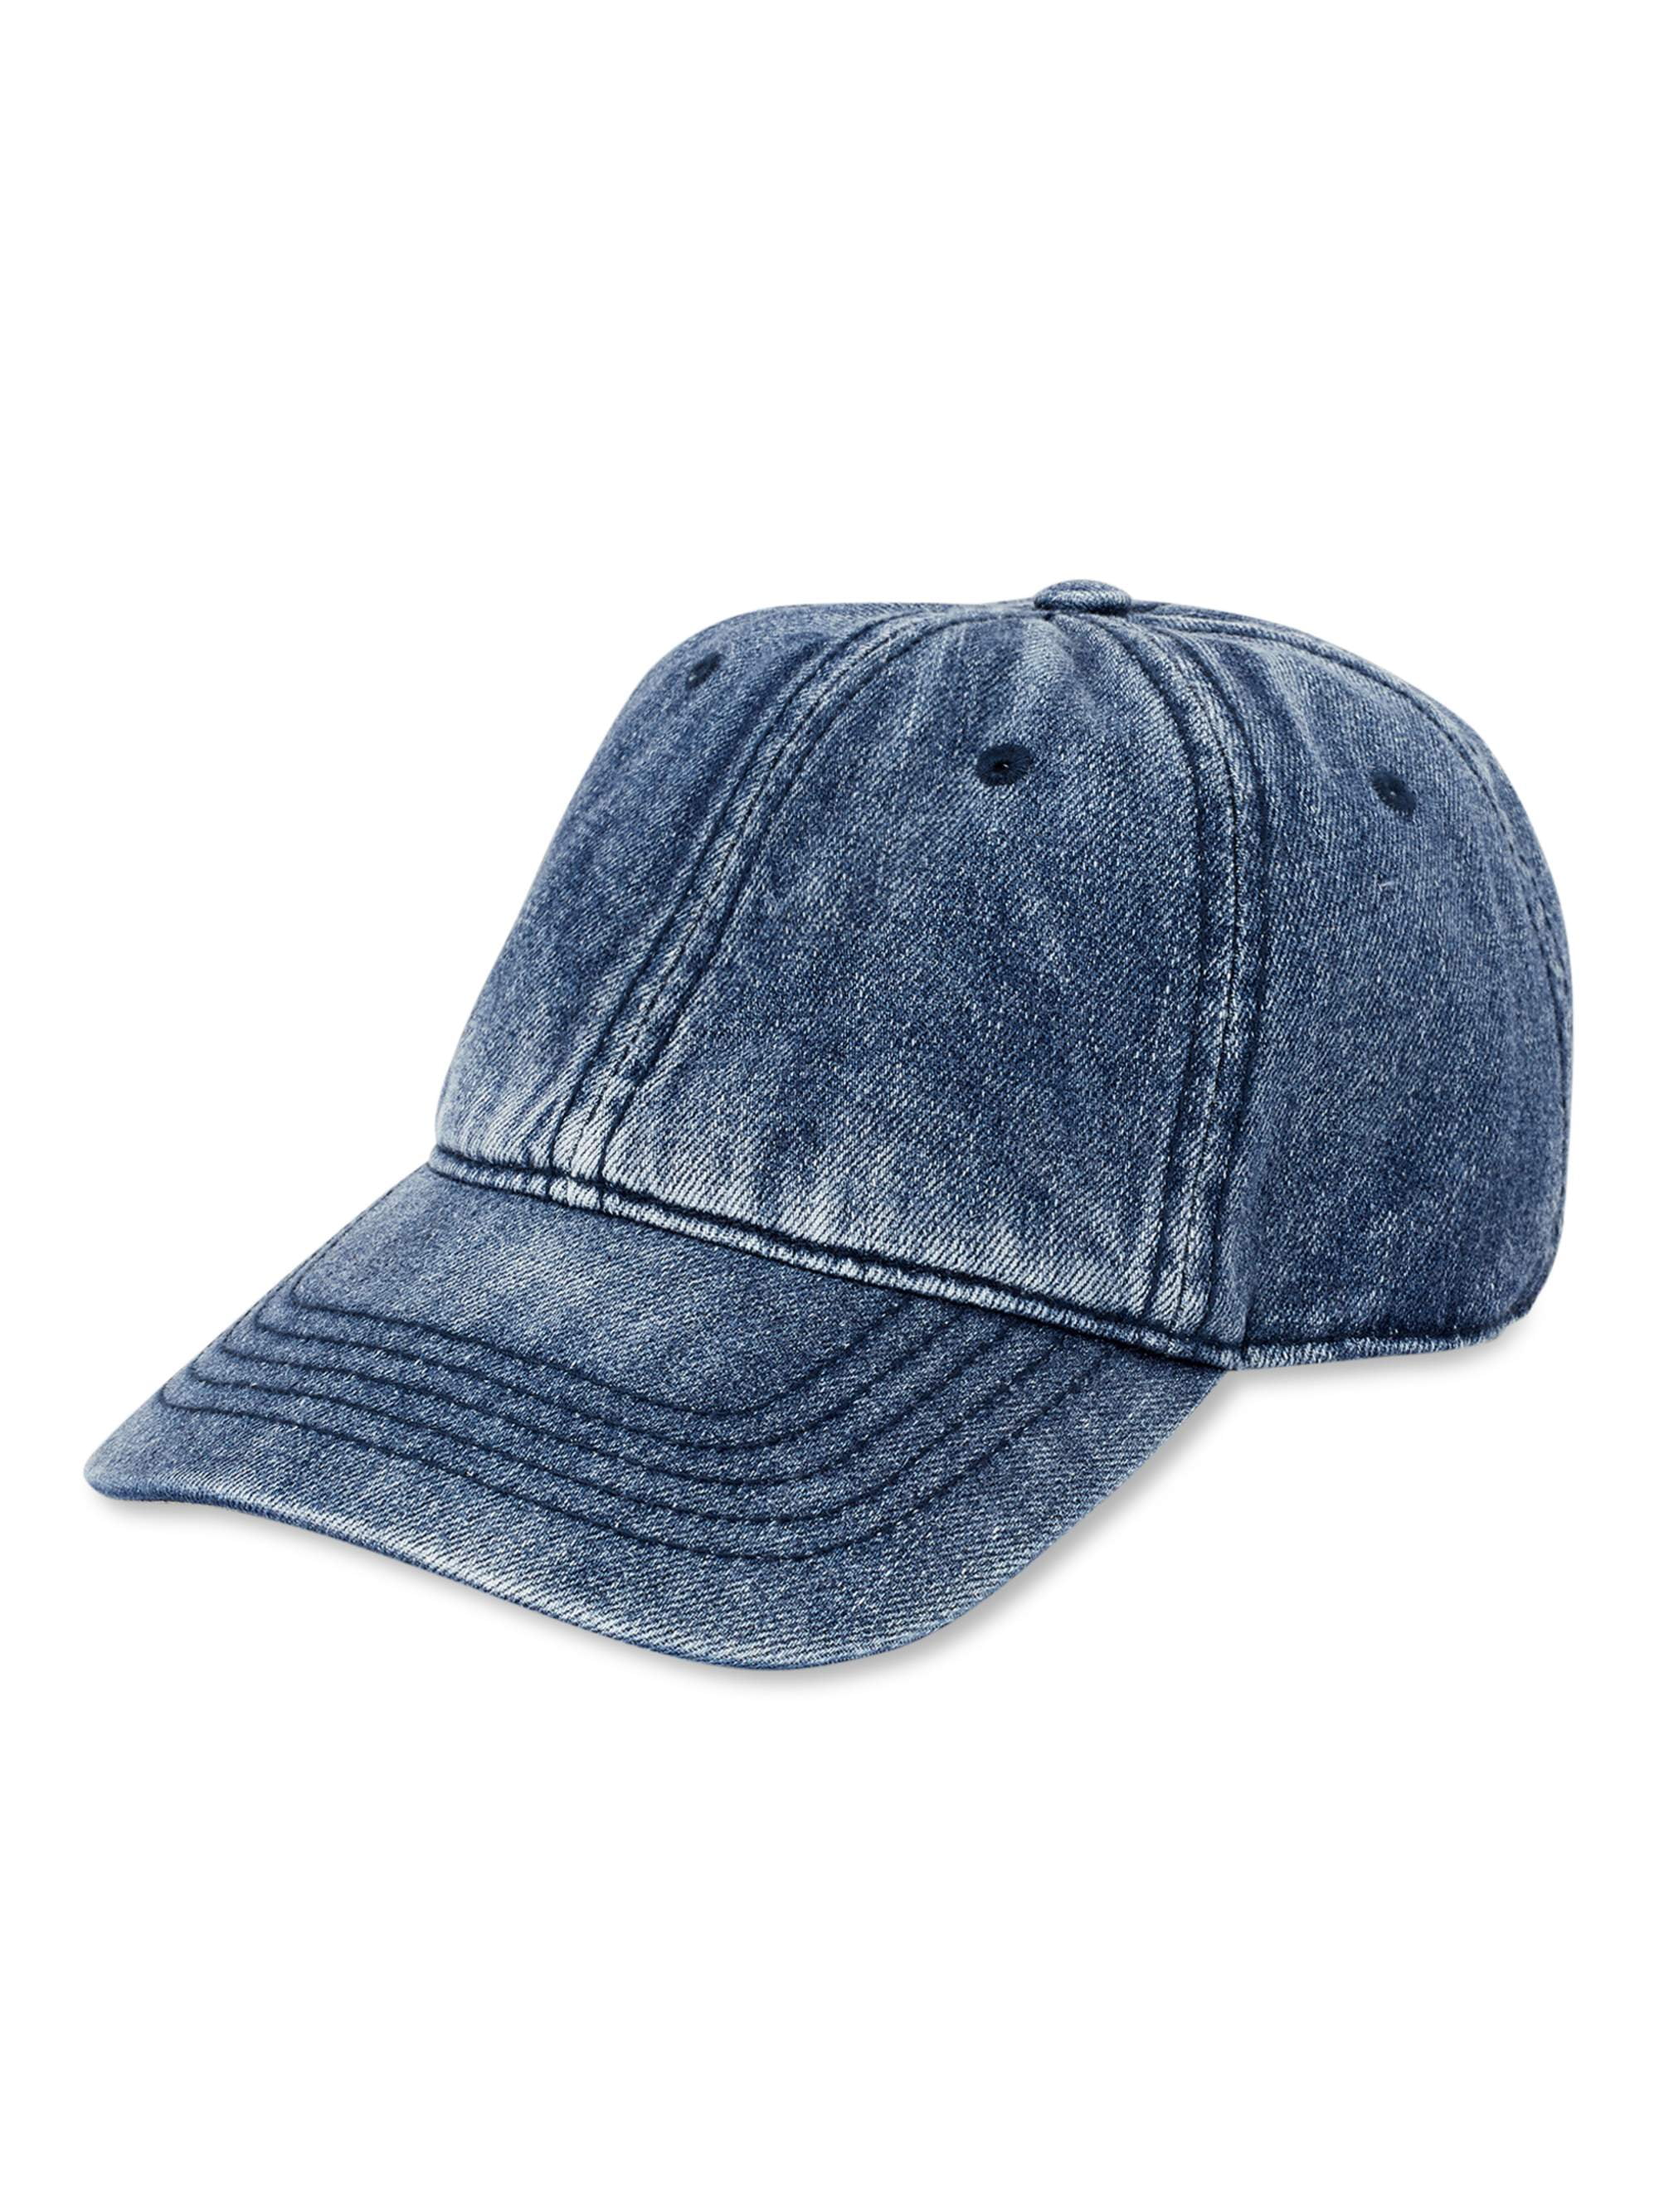 Time and Tru Women's Washed Cotton Twill Baseball Hat, Blue Denim